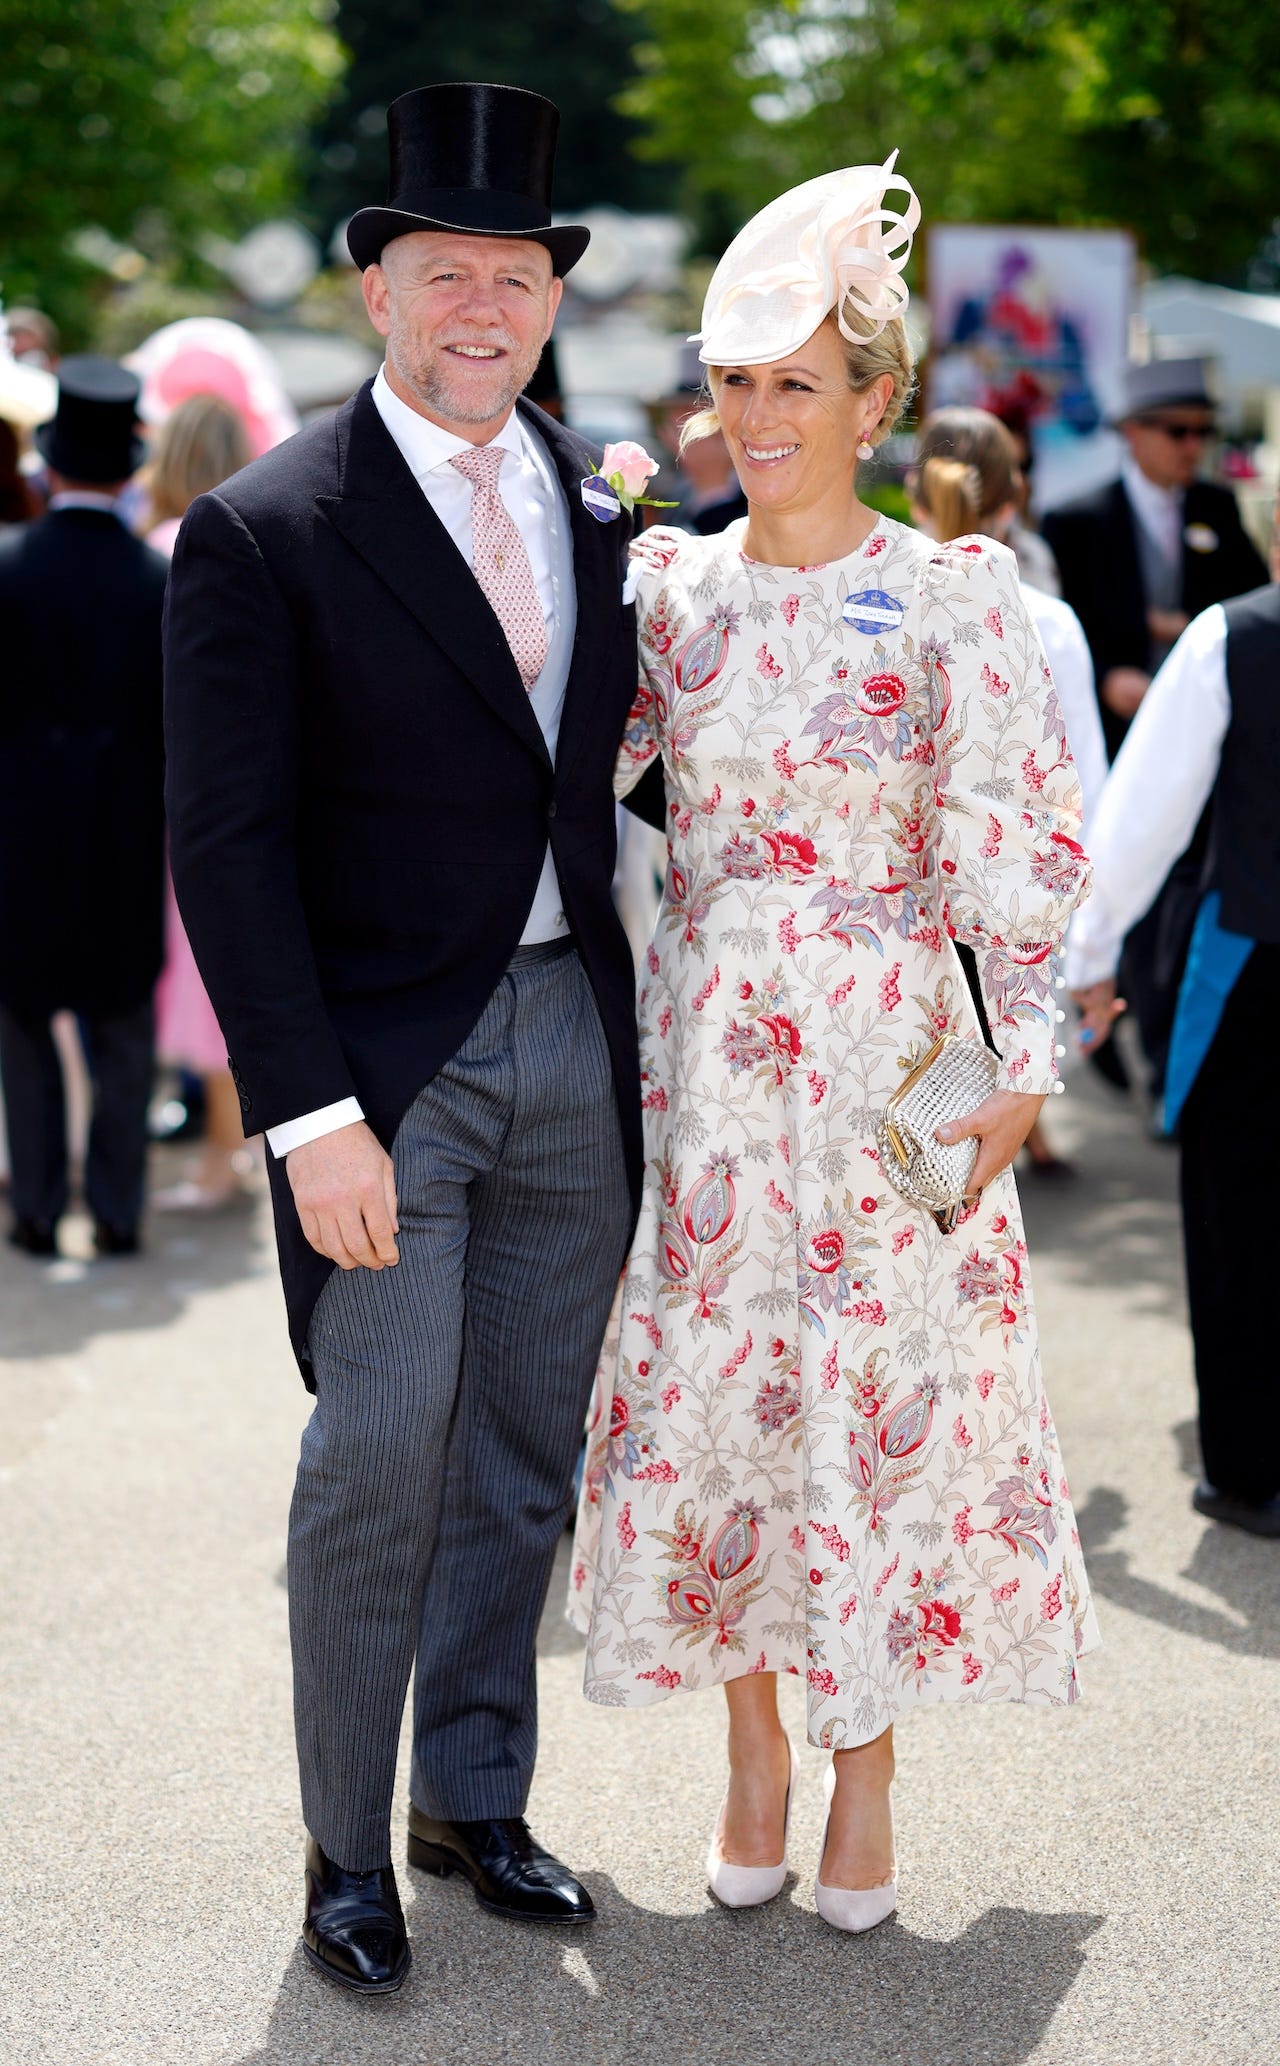 <p>Serving up another fashion masterclass for couples attending Royal Ascot, the Tindalls showed up in style on day two of the racing event.</p><p>Zara wore a white midi dress covered in red, pink, and light purple botanical prints. The $1,286 <a href="https://annamasonlondon.co.uk/products/angelika-dress-ss24?">Angelika dress</a>, designed by Anna Mason London, featured puff sleeves and long cuffs. Zara paired it with a light-pink fascinator, white pumps, and a metallic clutch in a similar shade of white.</p><p>Staying loyal to the men's dress code, Mike opted for a black morning suit jacket with gray-striped pants. He added flair to the look with a silk waistcoat, a pink tie, and a pink rose boutonnière.</p>